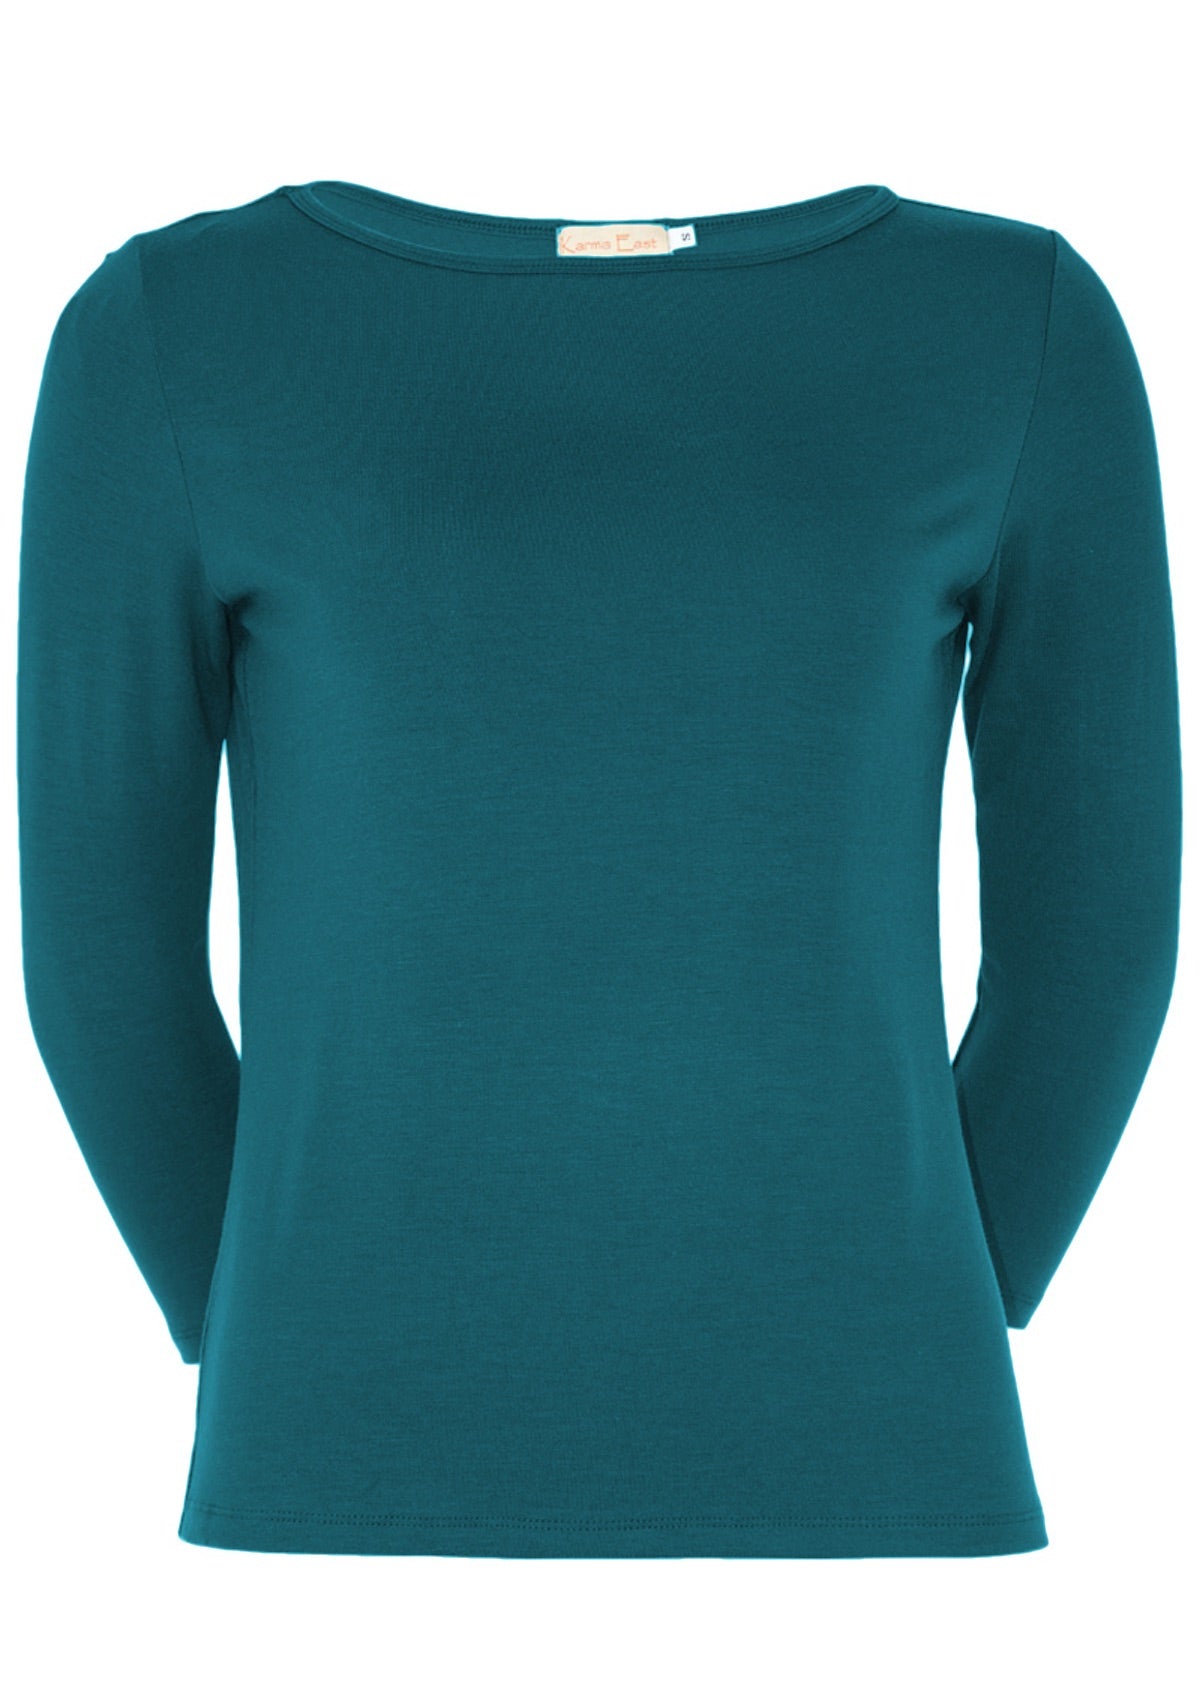 Front view of women's rayon boat neck teal 3/4 sleeve top.